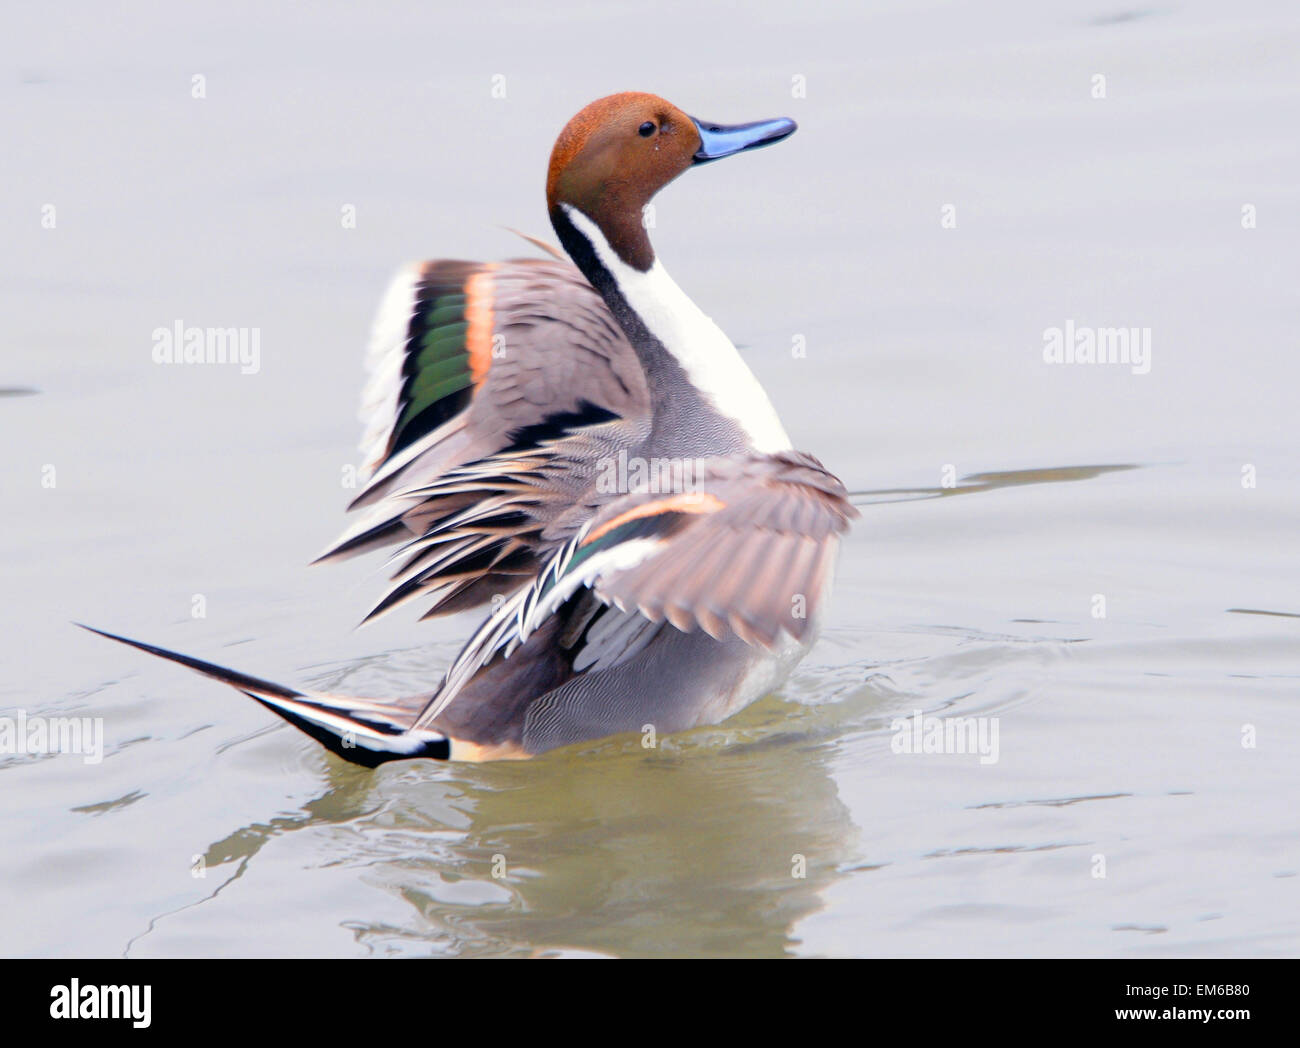 Northern Pintail duck at the Wildfowl and Wetlands centre, Arundel, West Sussex. Pic Mike Walker, Mike Walker Pictures Stock Photo